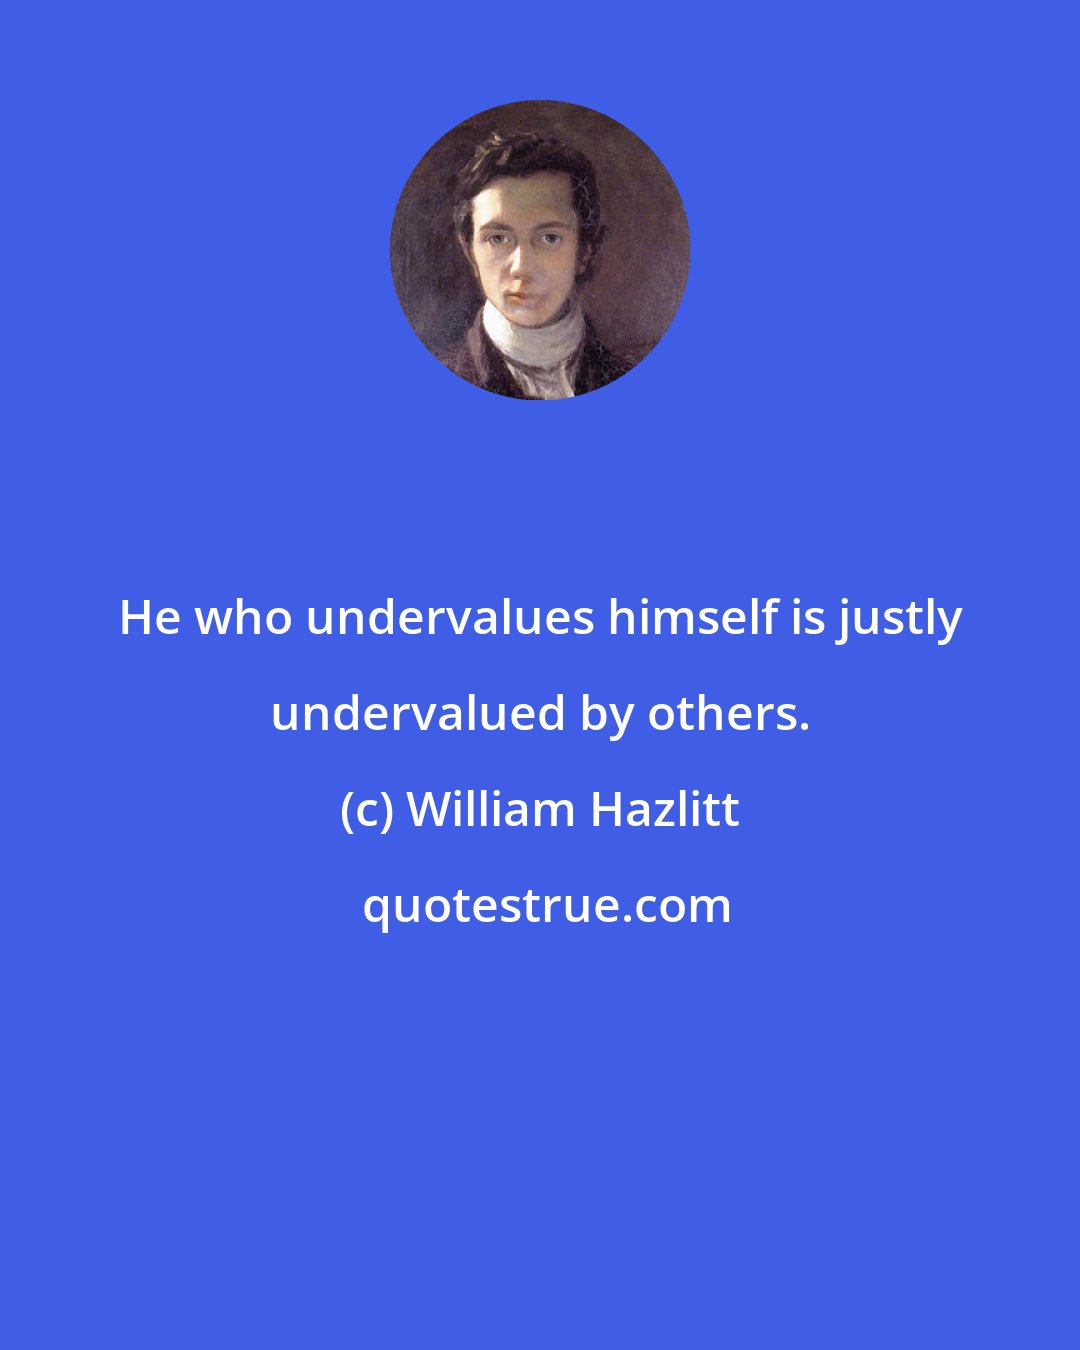 William Hazlitt: He who undervalues himself is justly undervalued by others.